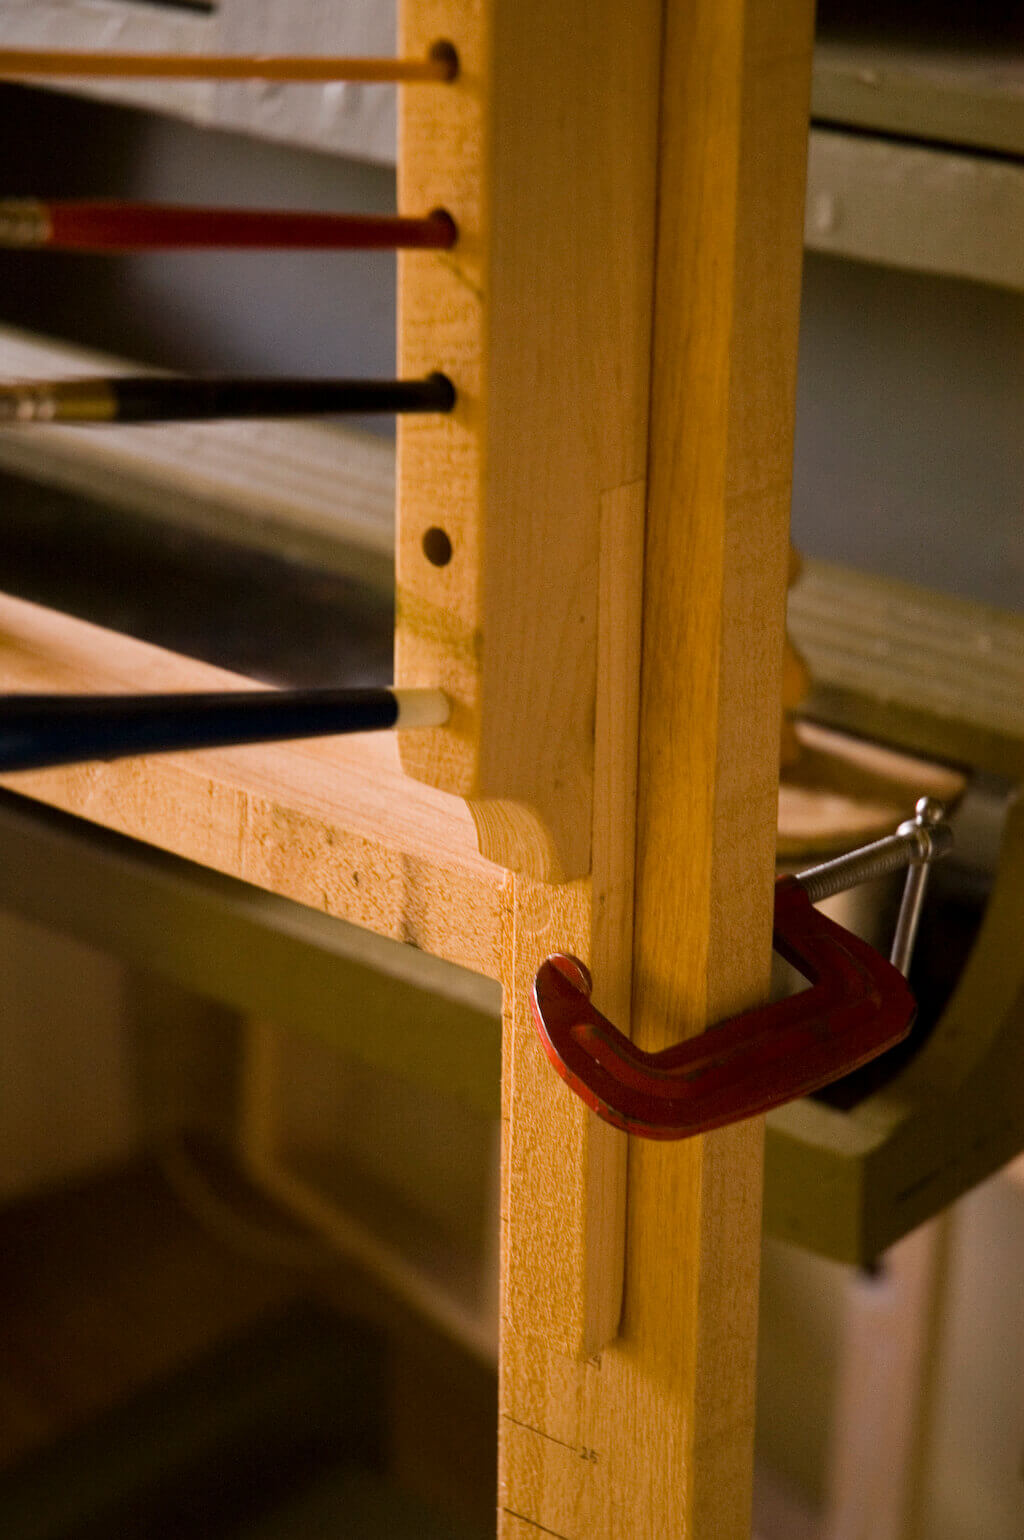 The extension at the bottom of the holder is clamped to the panel-support framework.